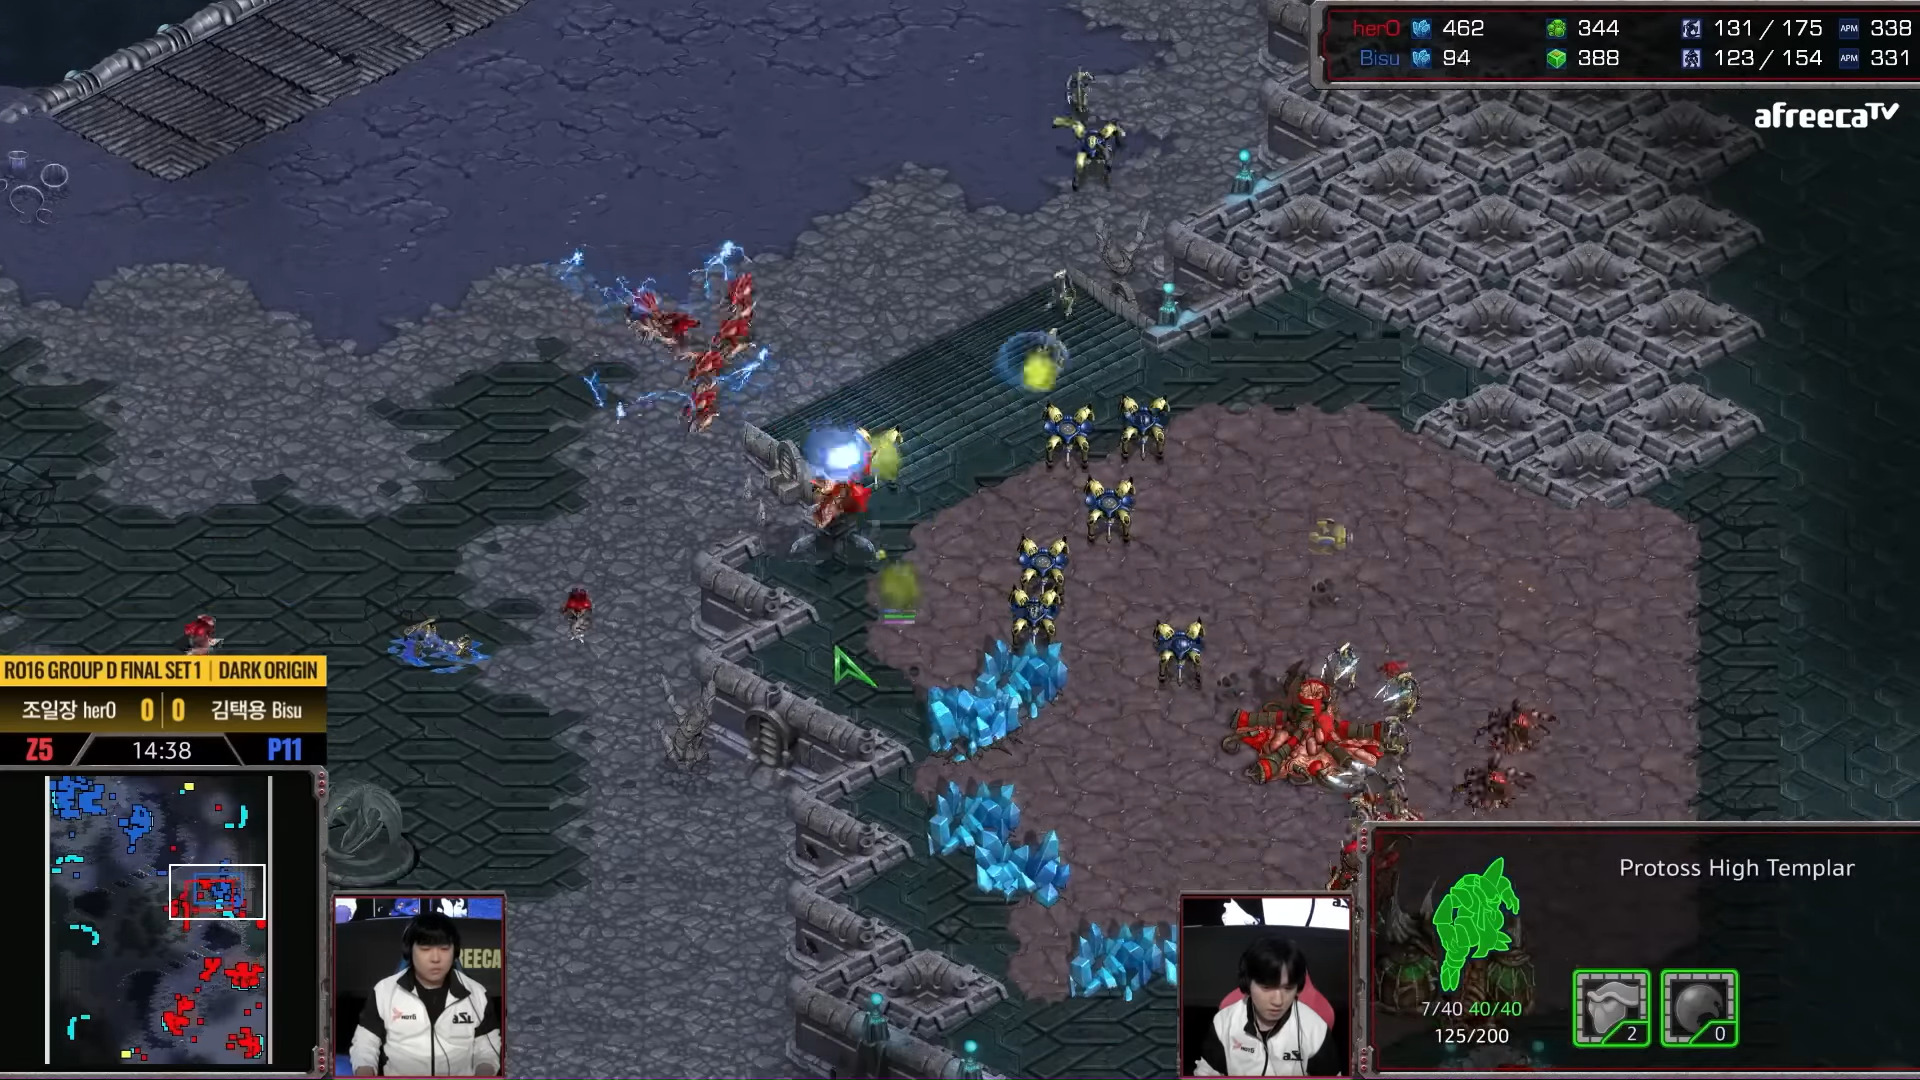 Taking StarCraft Away from the RTS Genre May be a Mistake